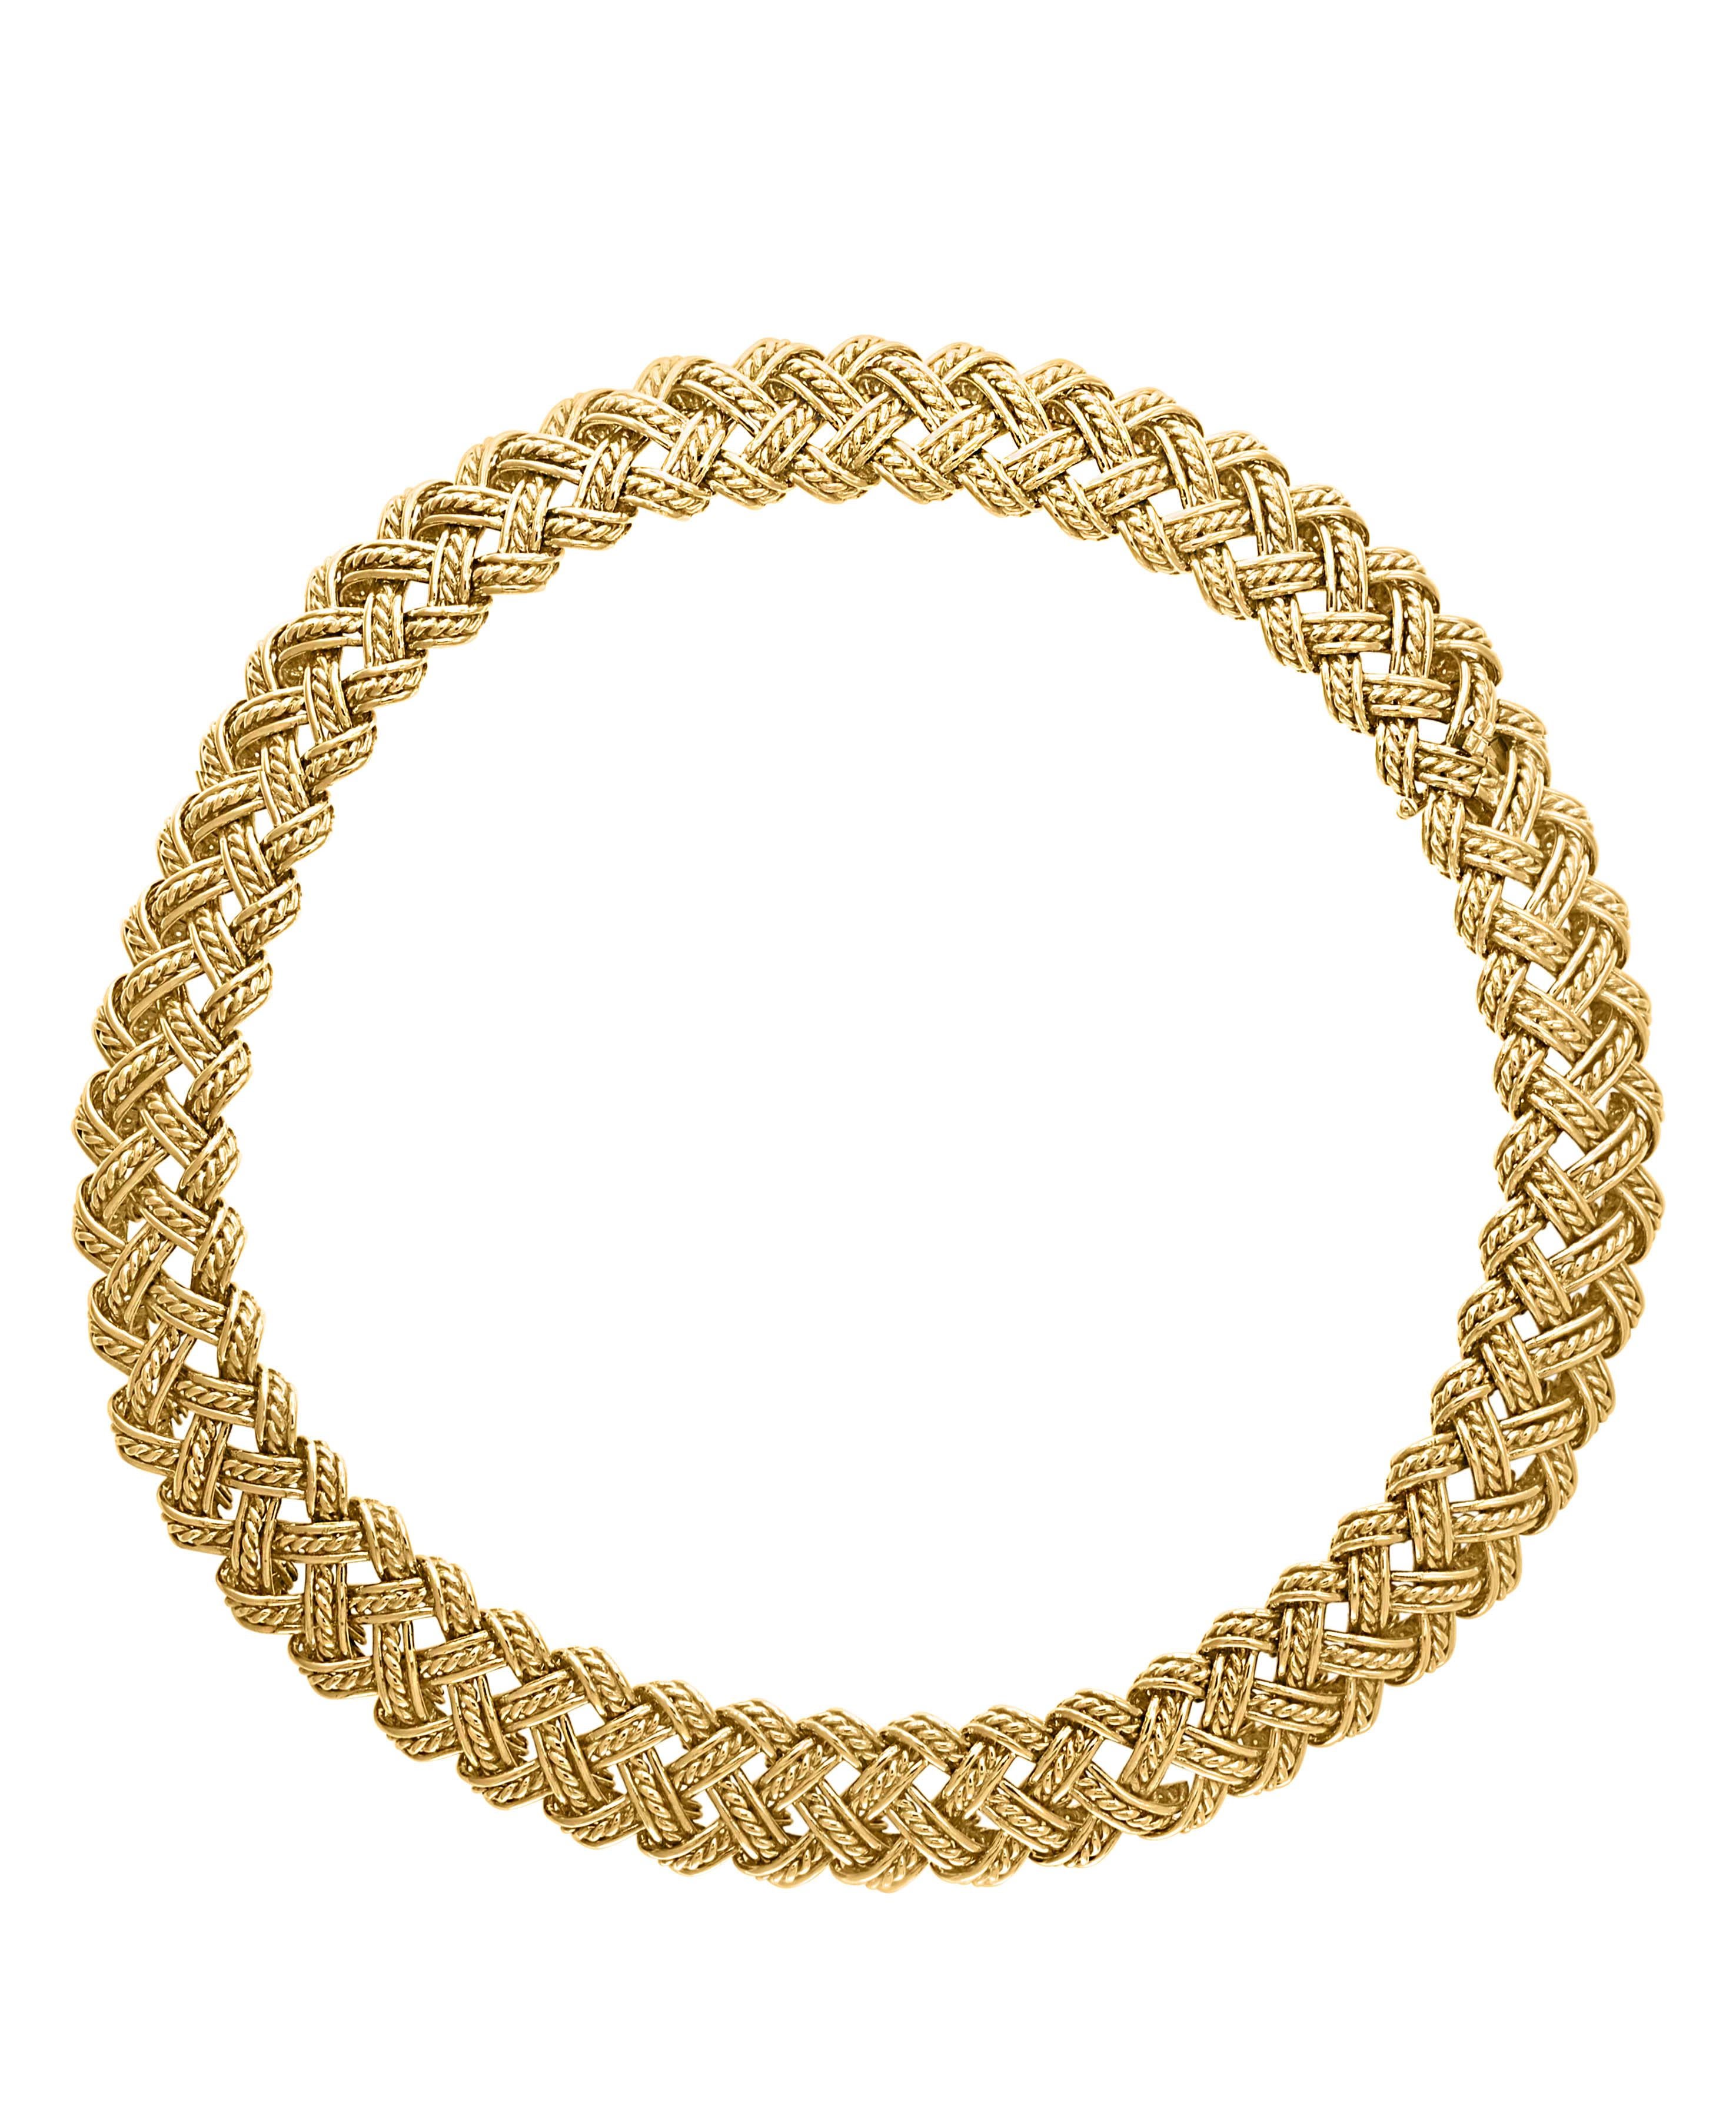 Bocheron Two-Piece Necklace and Bangle Set in 18 Karat Yellow Gold 165 Grams For Sale 5